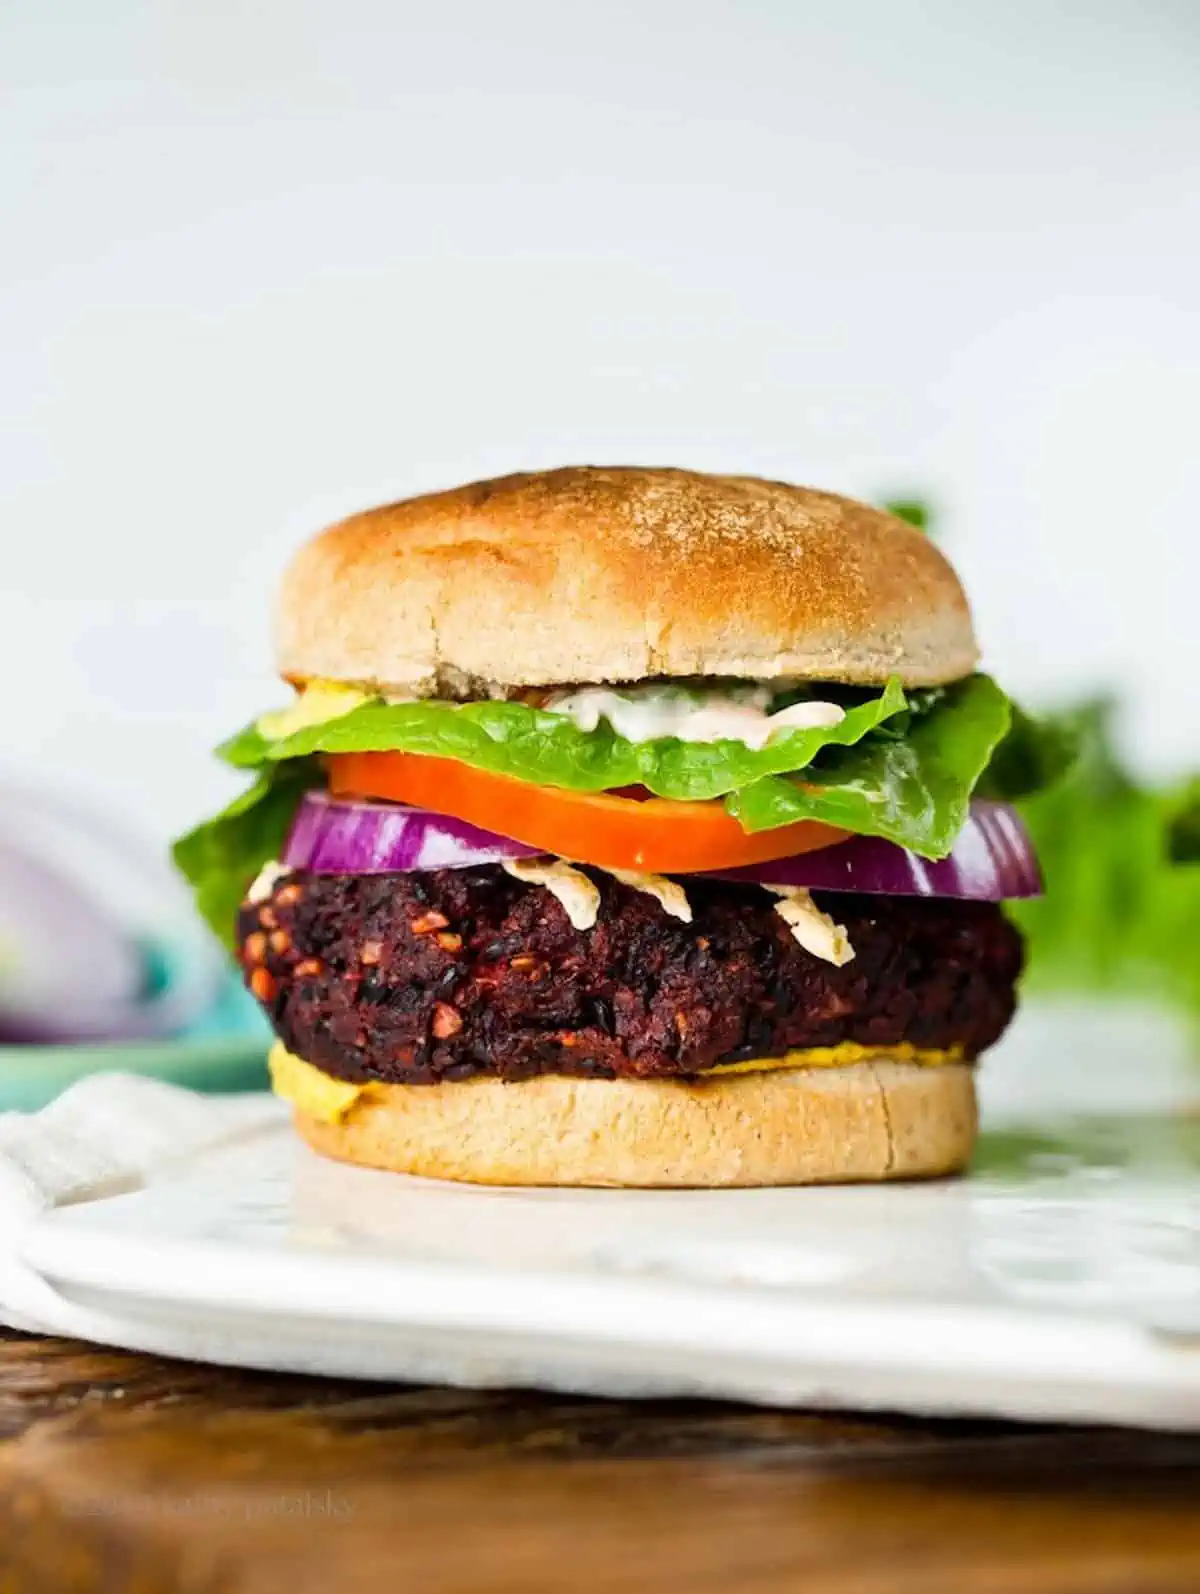 Beet burger with toppings and bun.